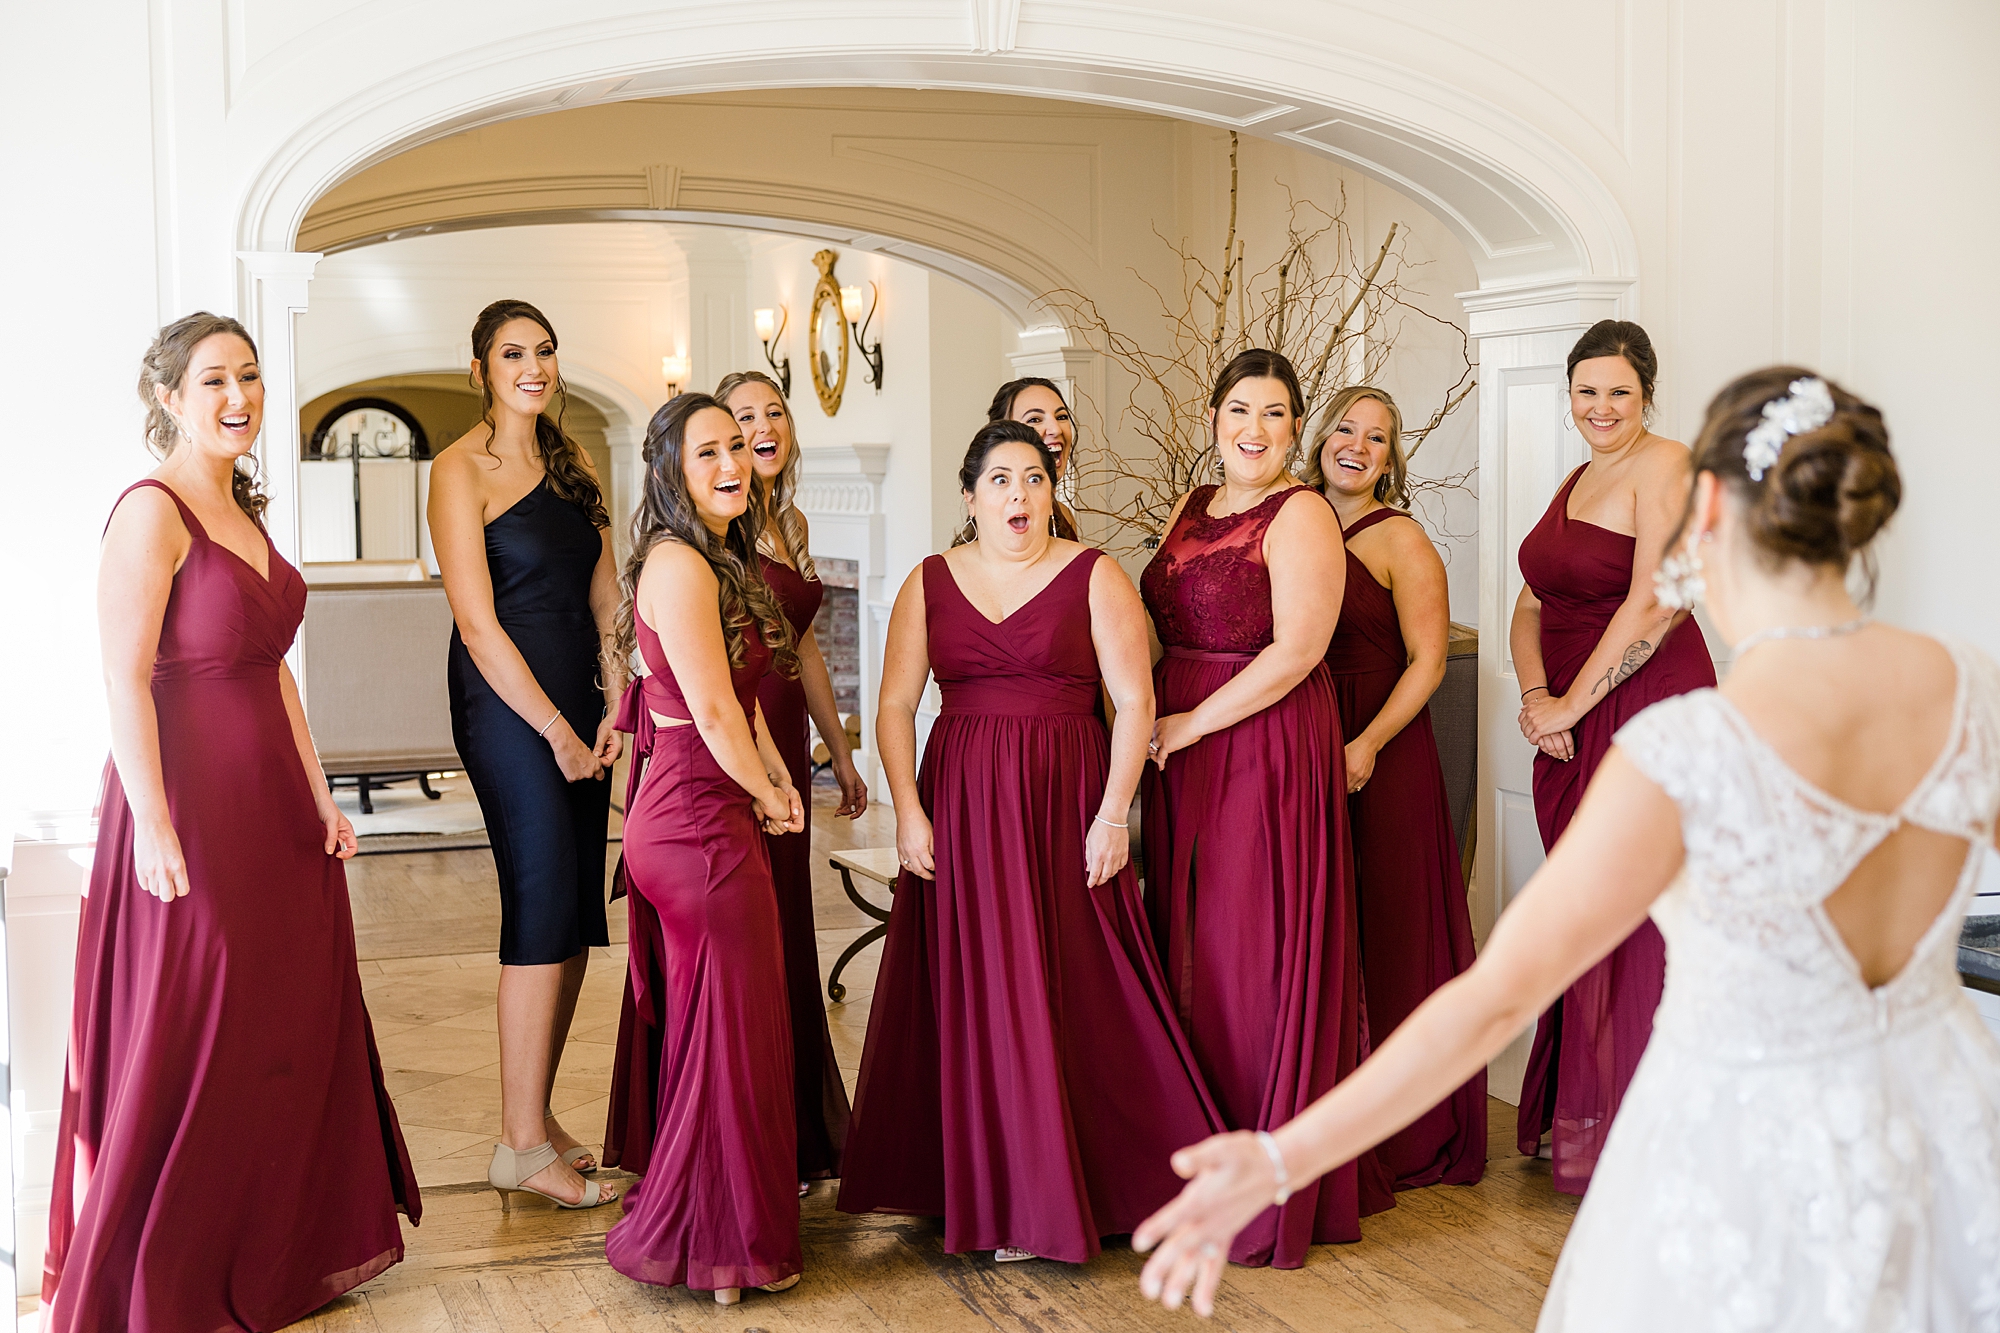 bridesmaids reactions to seeing bride in wedding dress